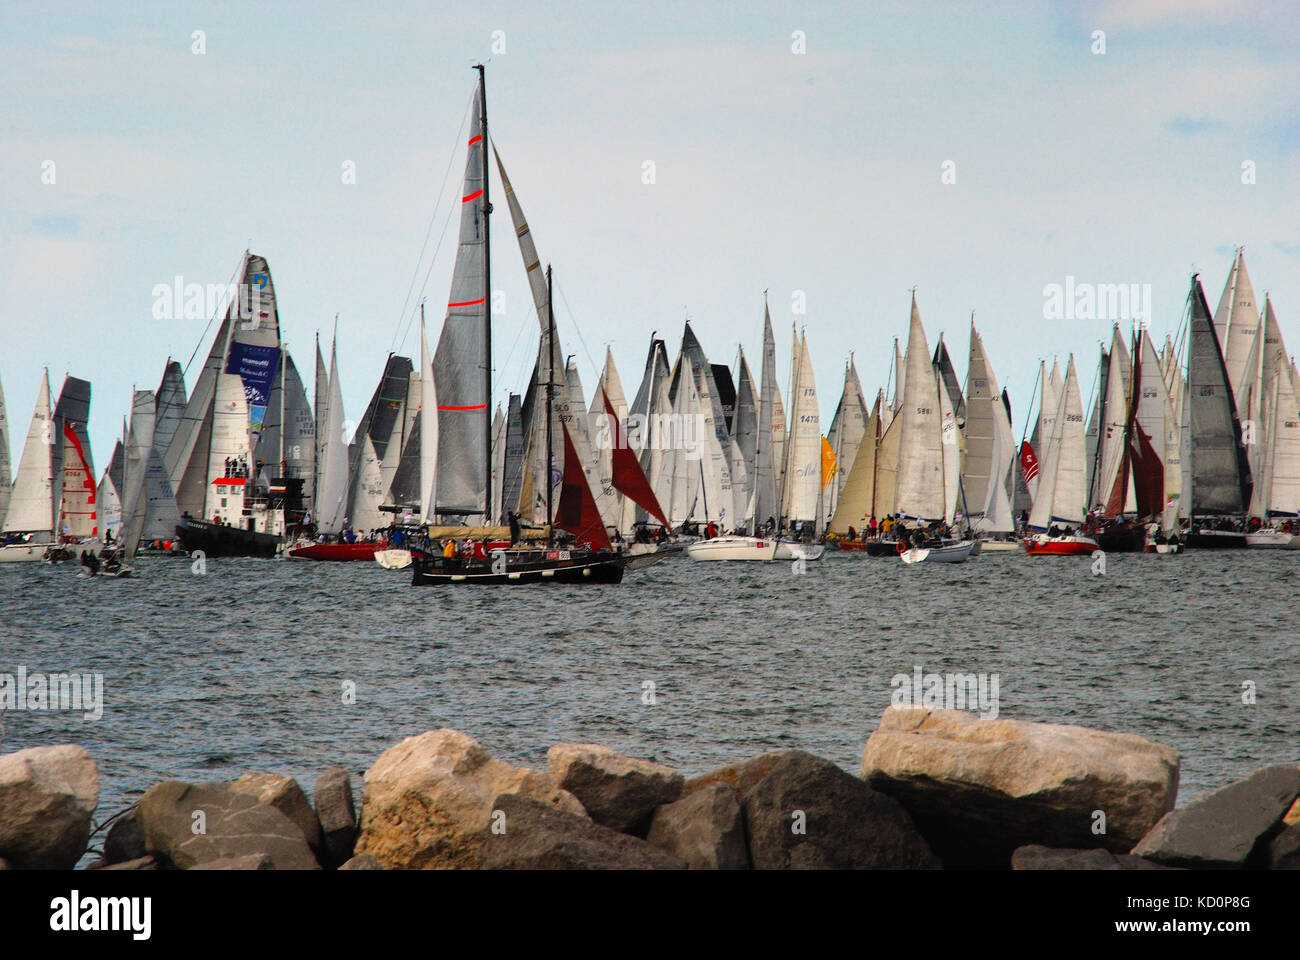 Trieste, Italy. 8th October, 2017. The 49th edition of the famous sailing-race 'Barcolana' takes place on an October Sunday with changeable weather. The 2017 regatta, with its 2101 racing boats, beats World record for number of enrollments, gaining a place in the Guinness Book of Rekords. The boat 'Spirit of Portopiccolo' comes in first. Credit: Ferdinando Piezzi/Alamy Live News Stock Photo